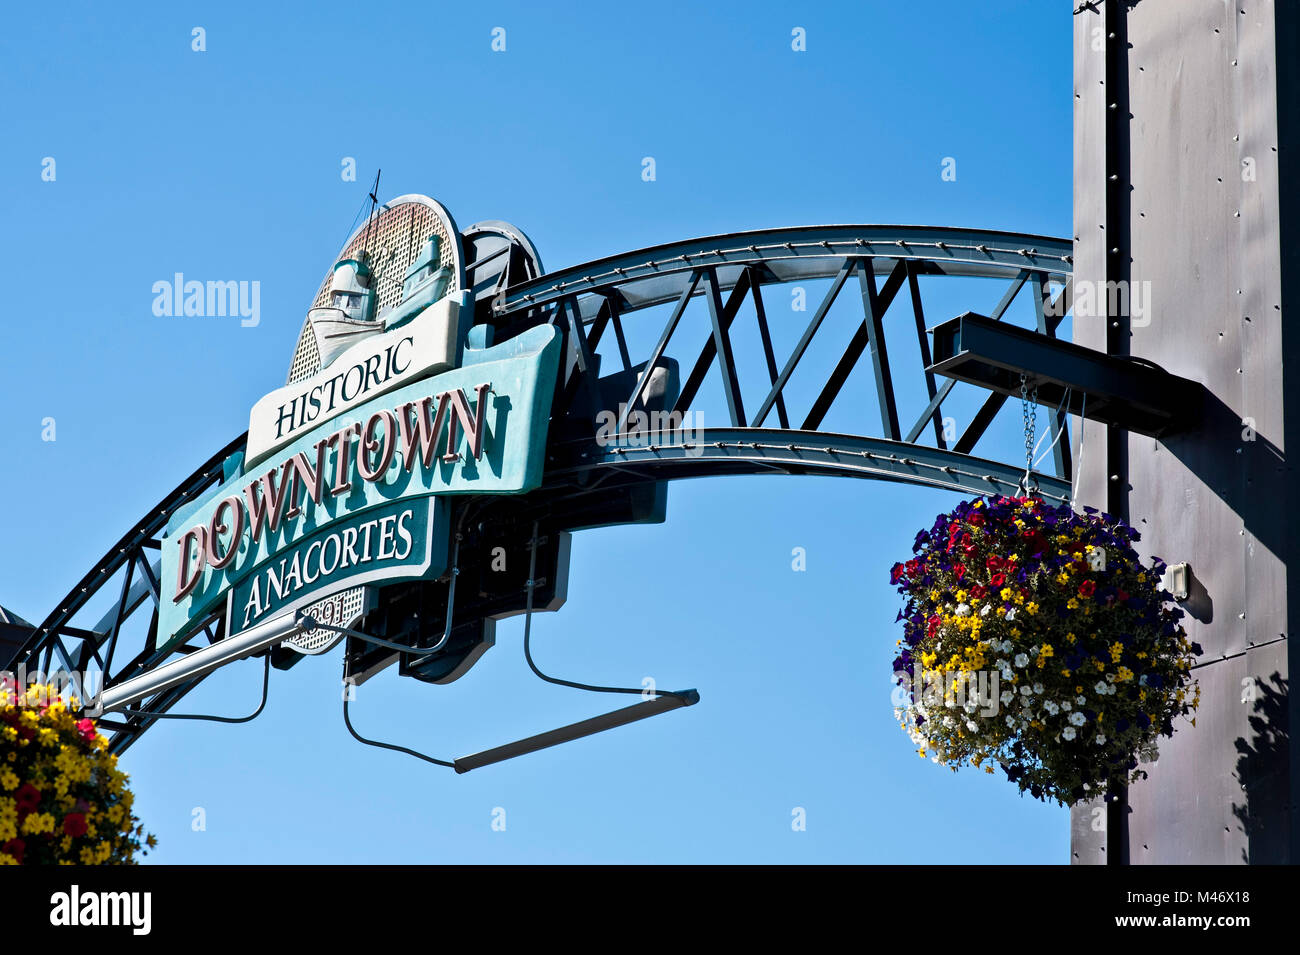 Historic Downtown Anacortes sign Stock Photo